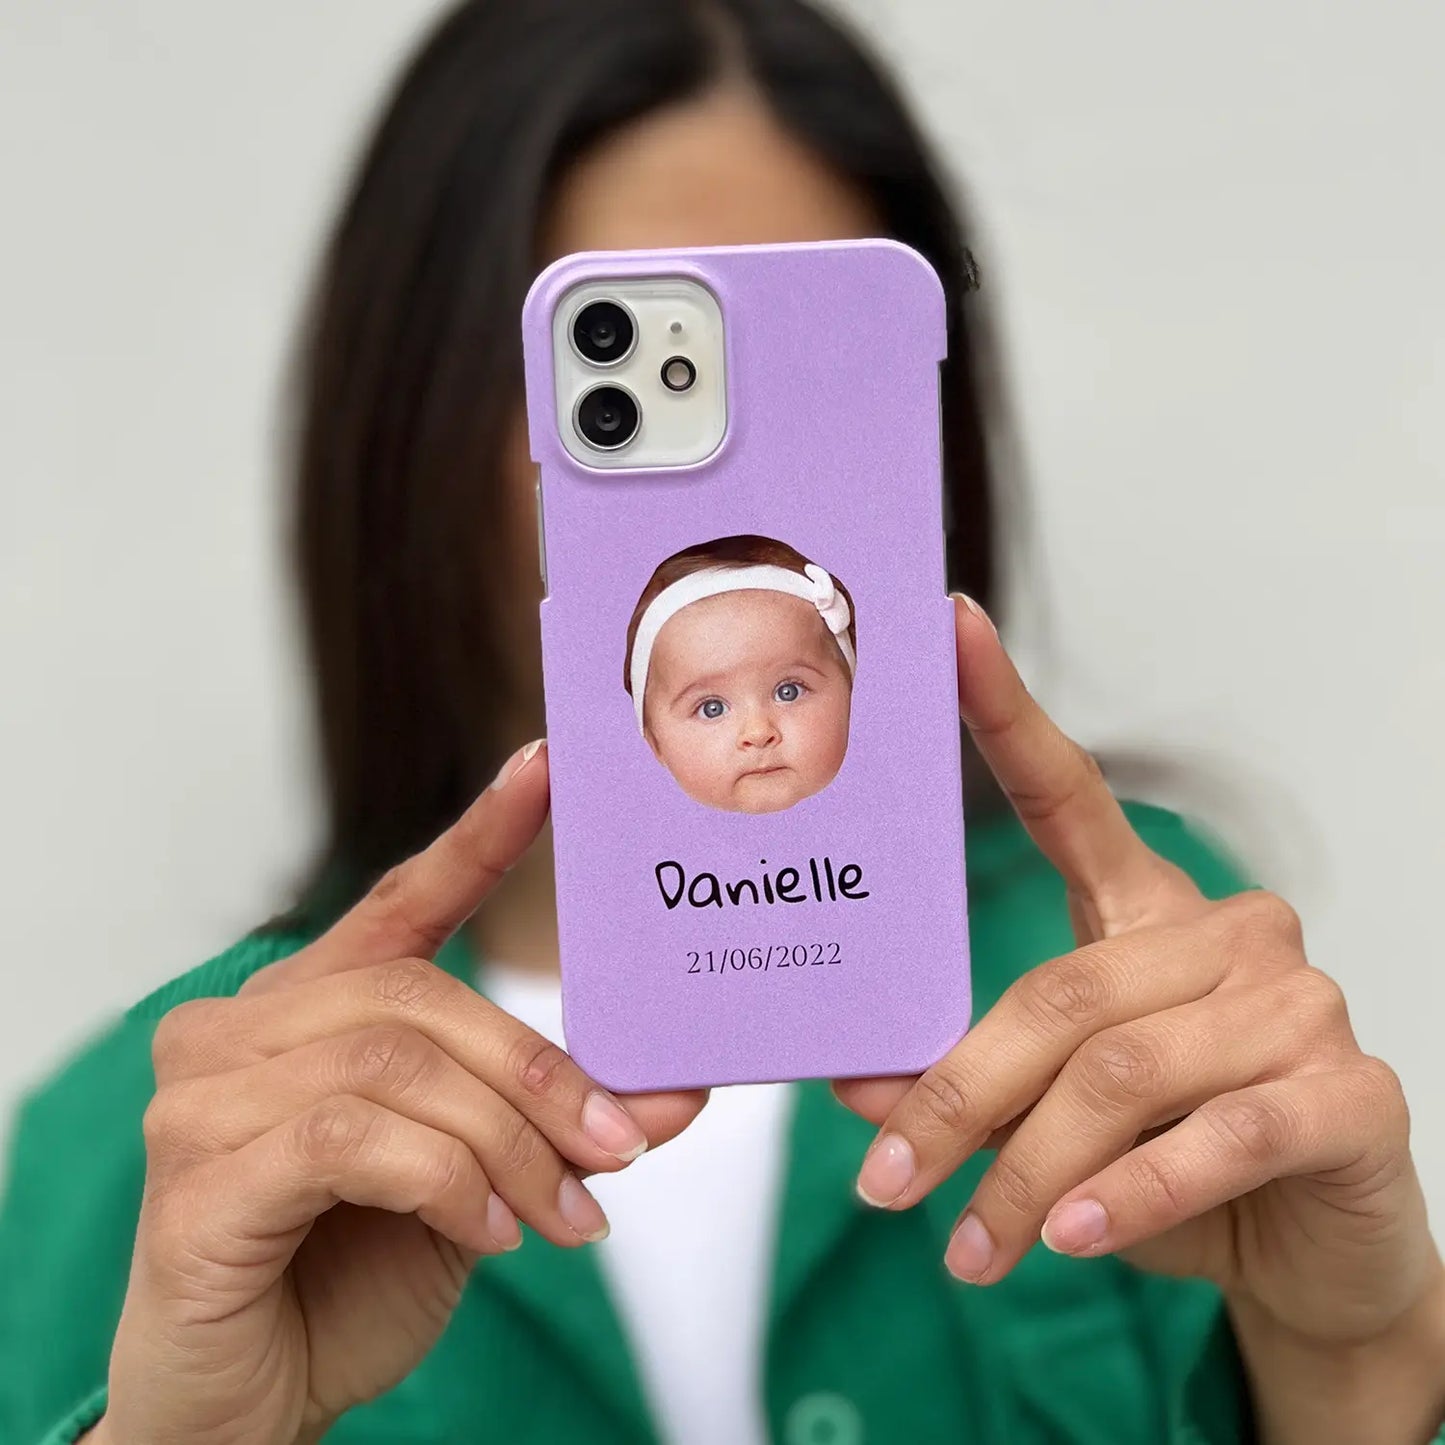 Let’s Face It - Personalised Galaxy S Case